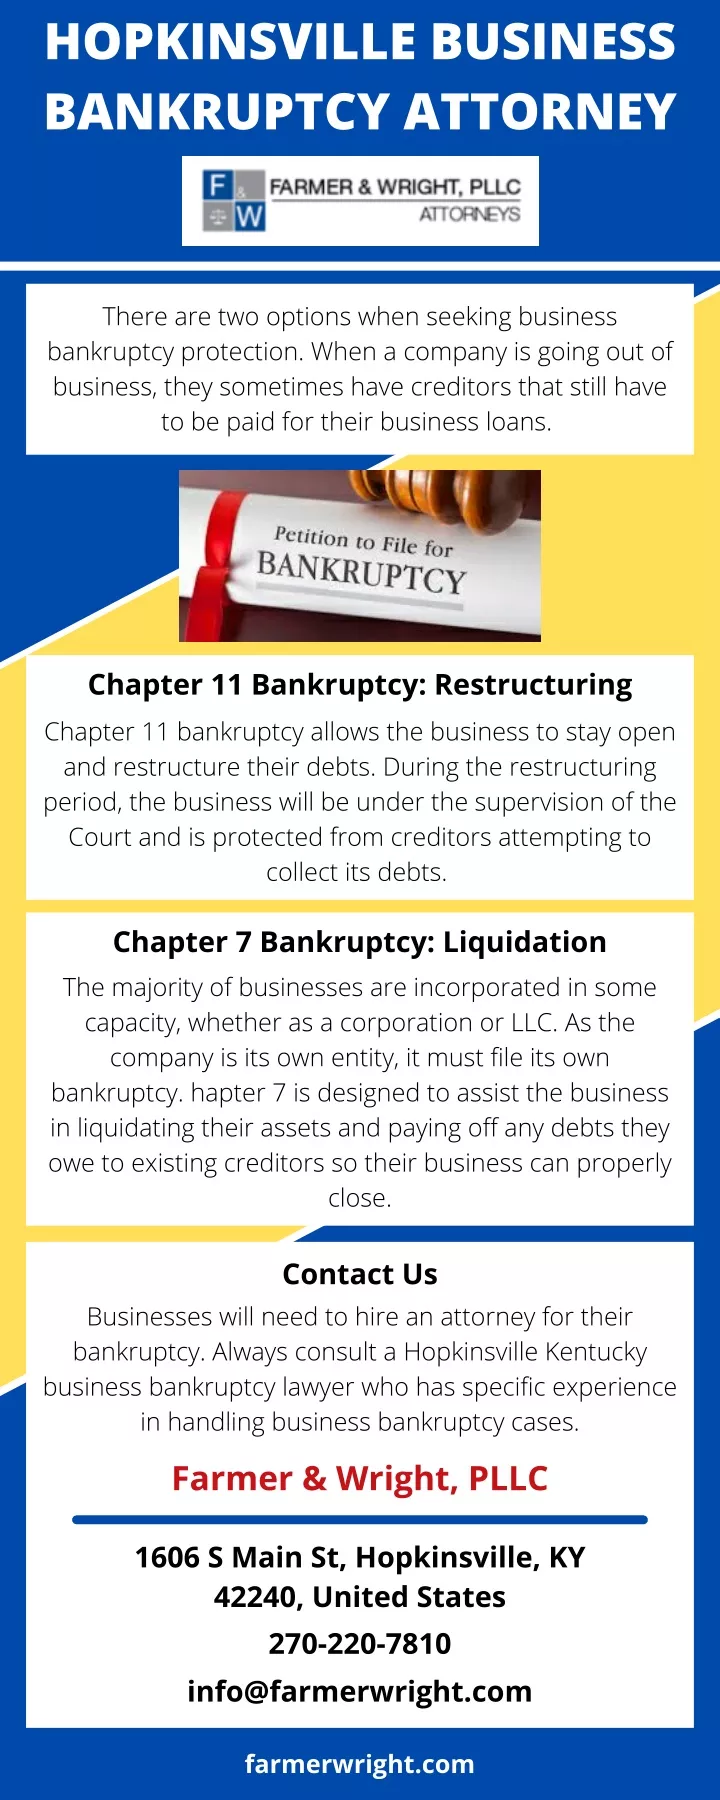 hopkinsville business bankruptcy attorney